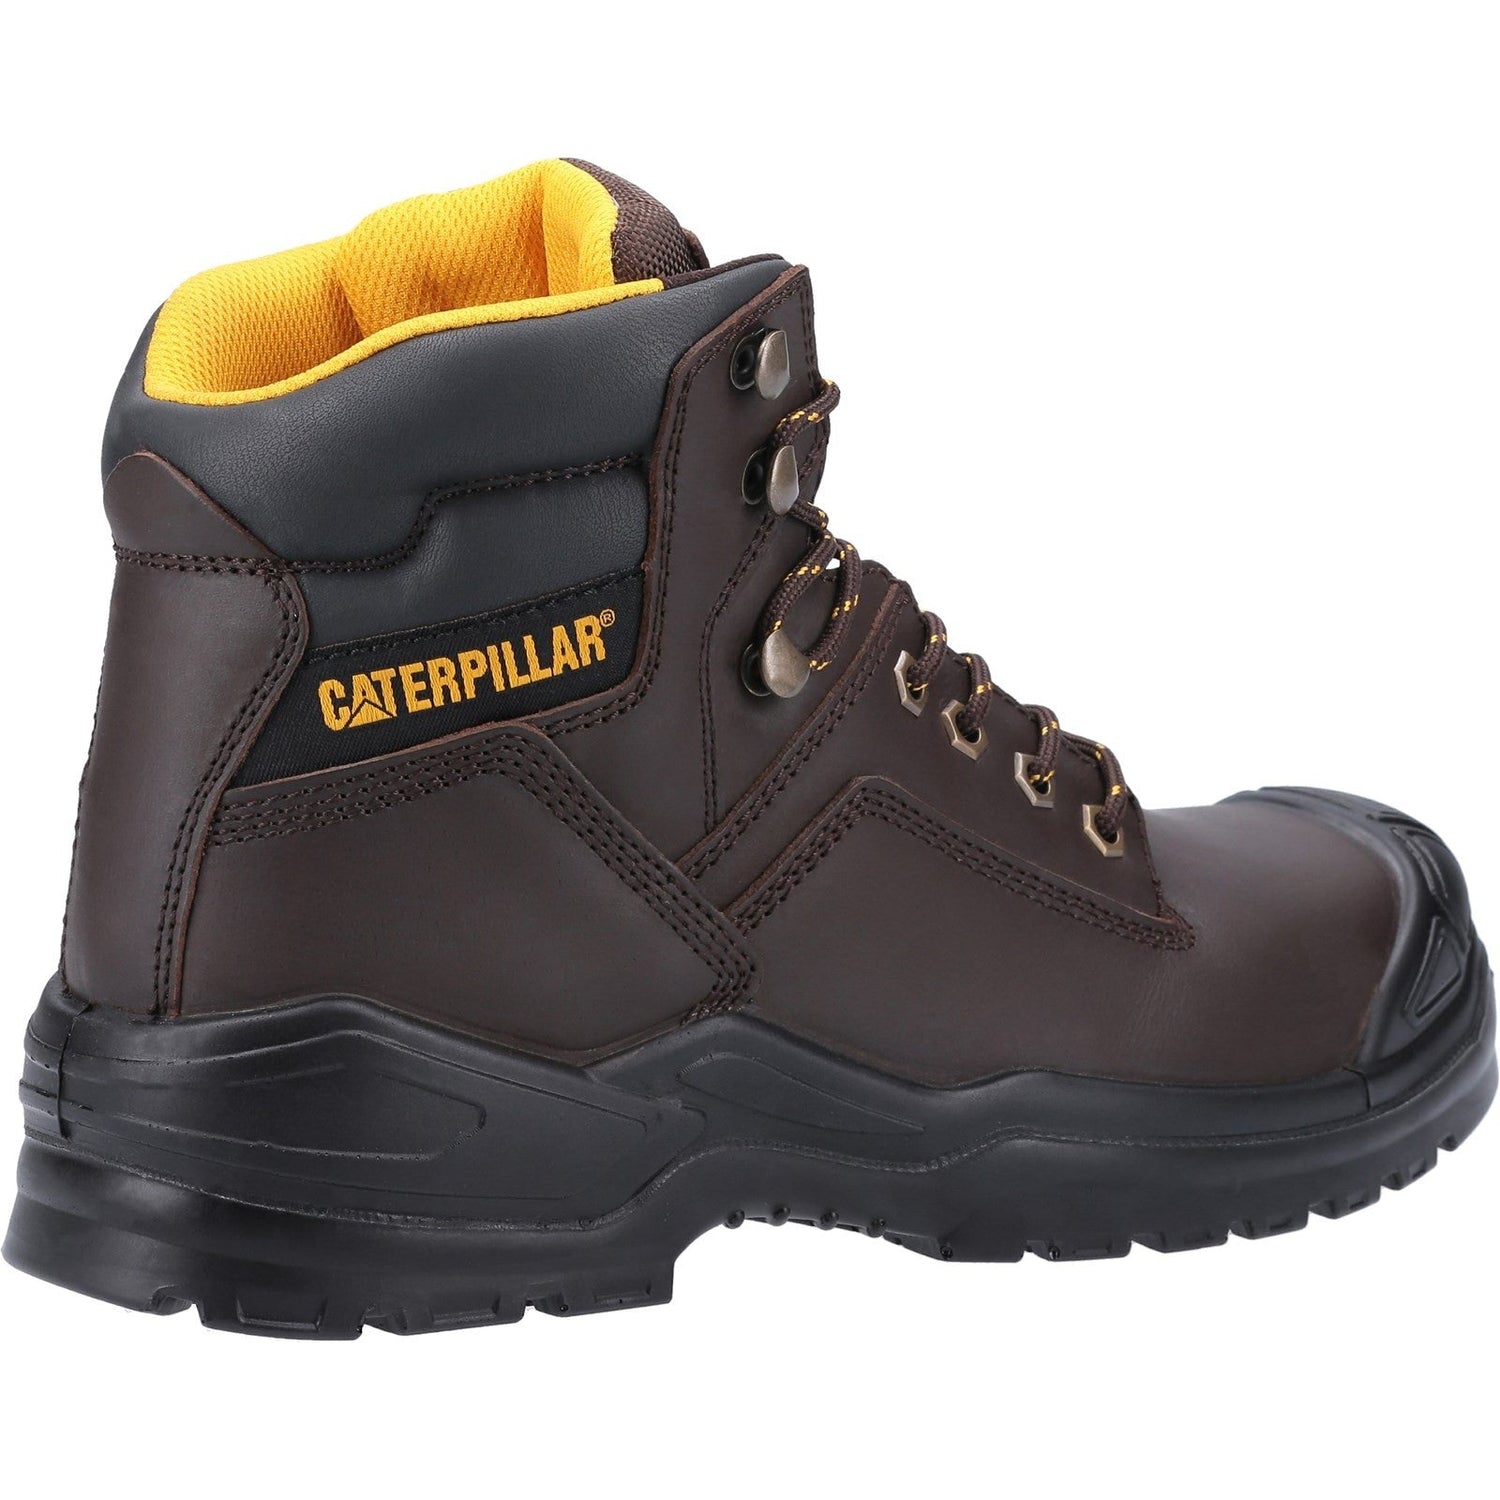 Caterpillar Striver Mid S3 Safety Boot in Brown 